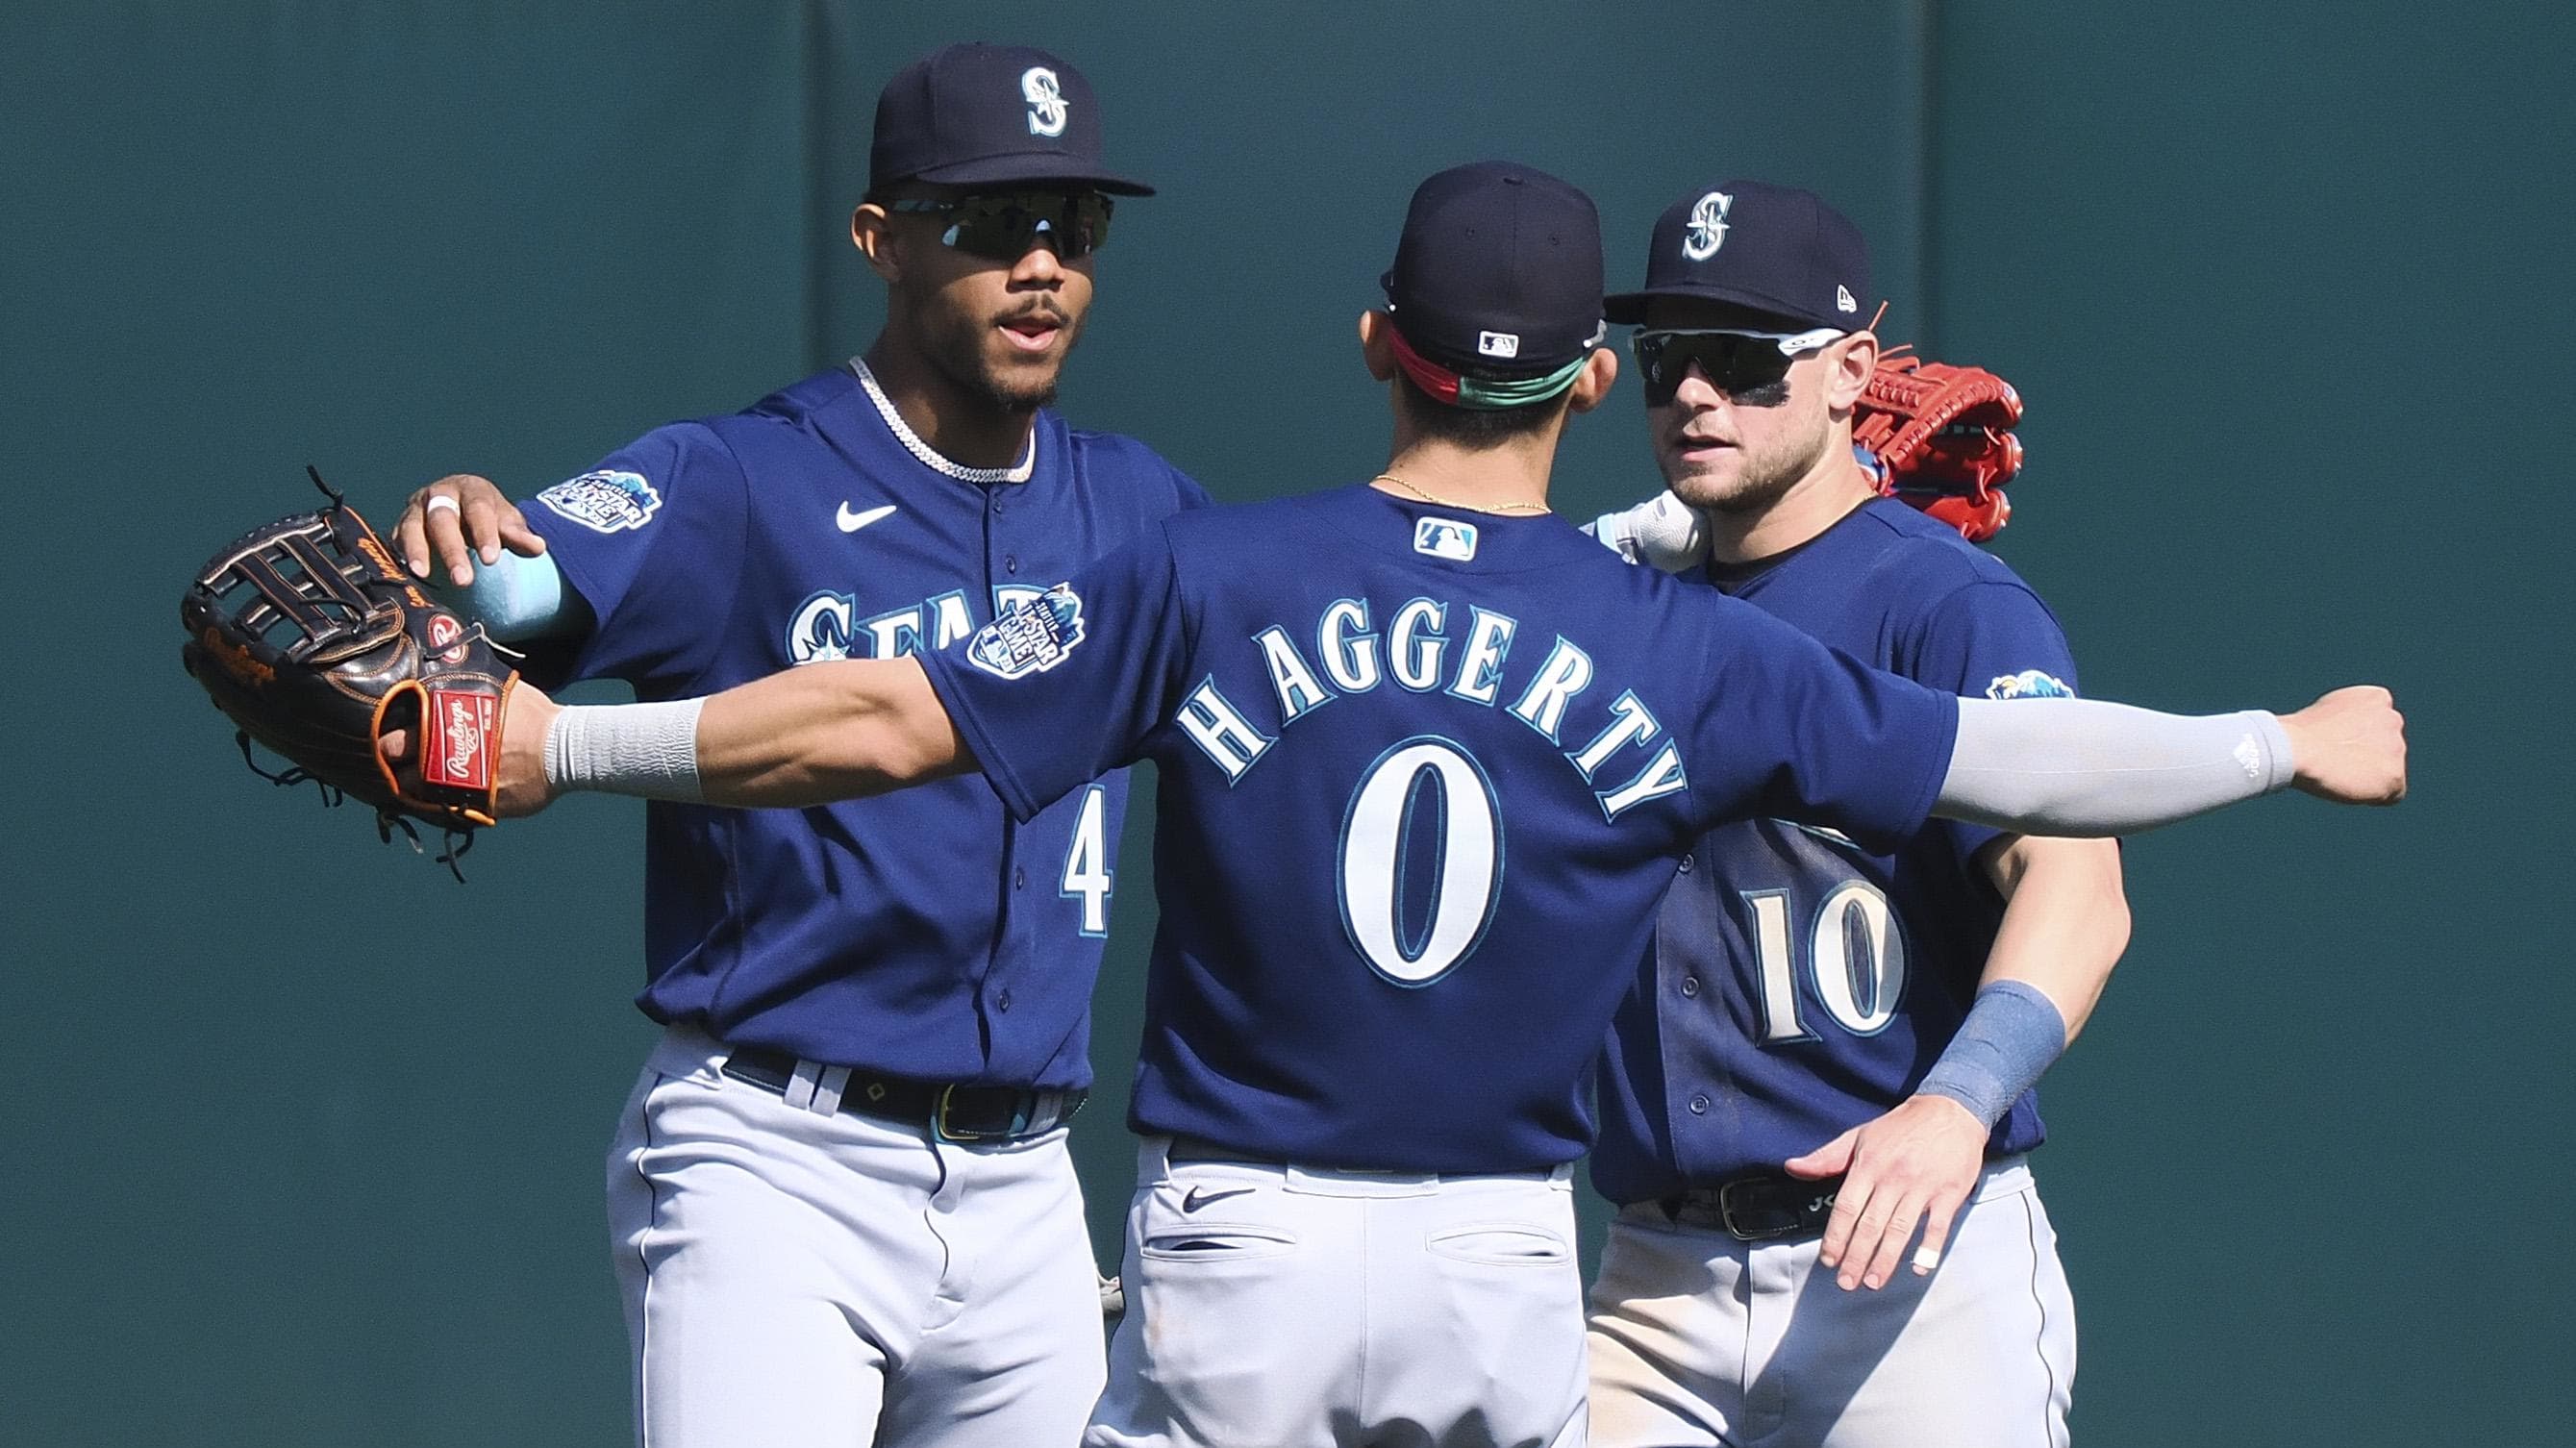 Seattle Mariners Re-call Popular Utility Player, Send Down Top Prospect